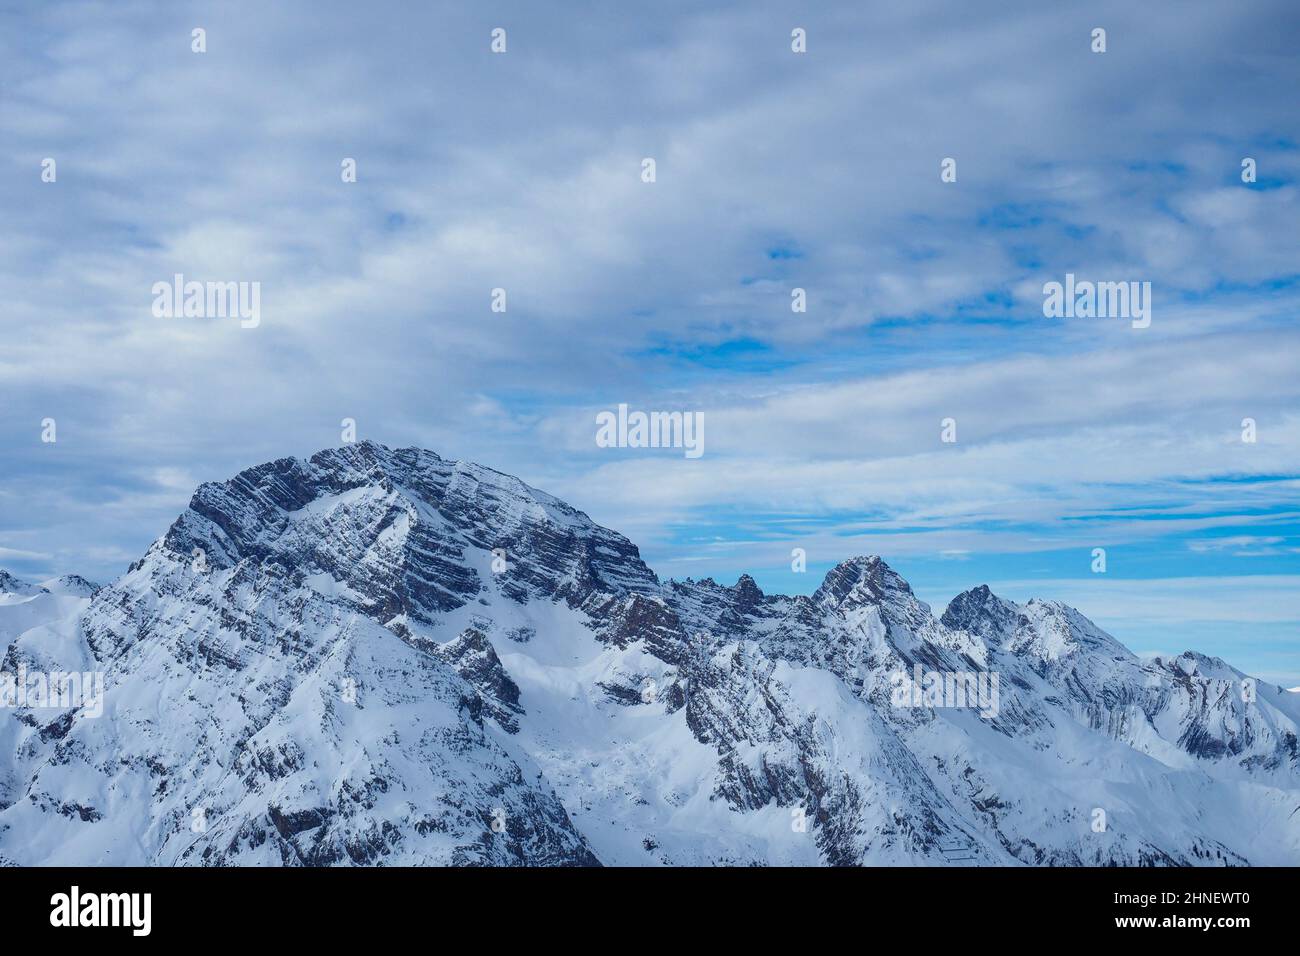 Piz Ela, a famous peak in Grisons, Switzerland, seen from Mount Darlux during winter conditions Stock Photo